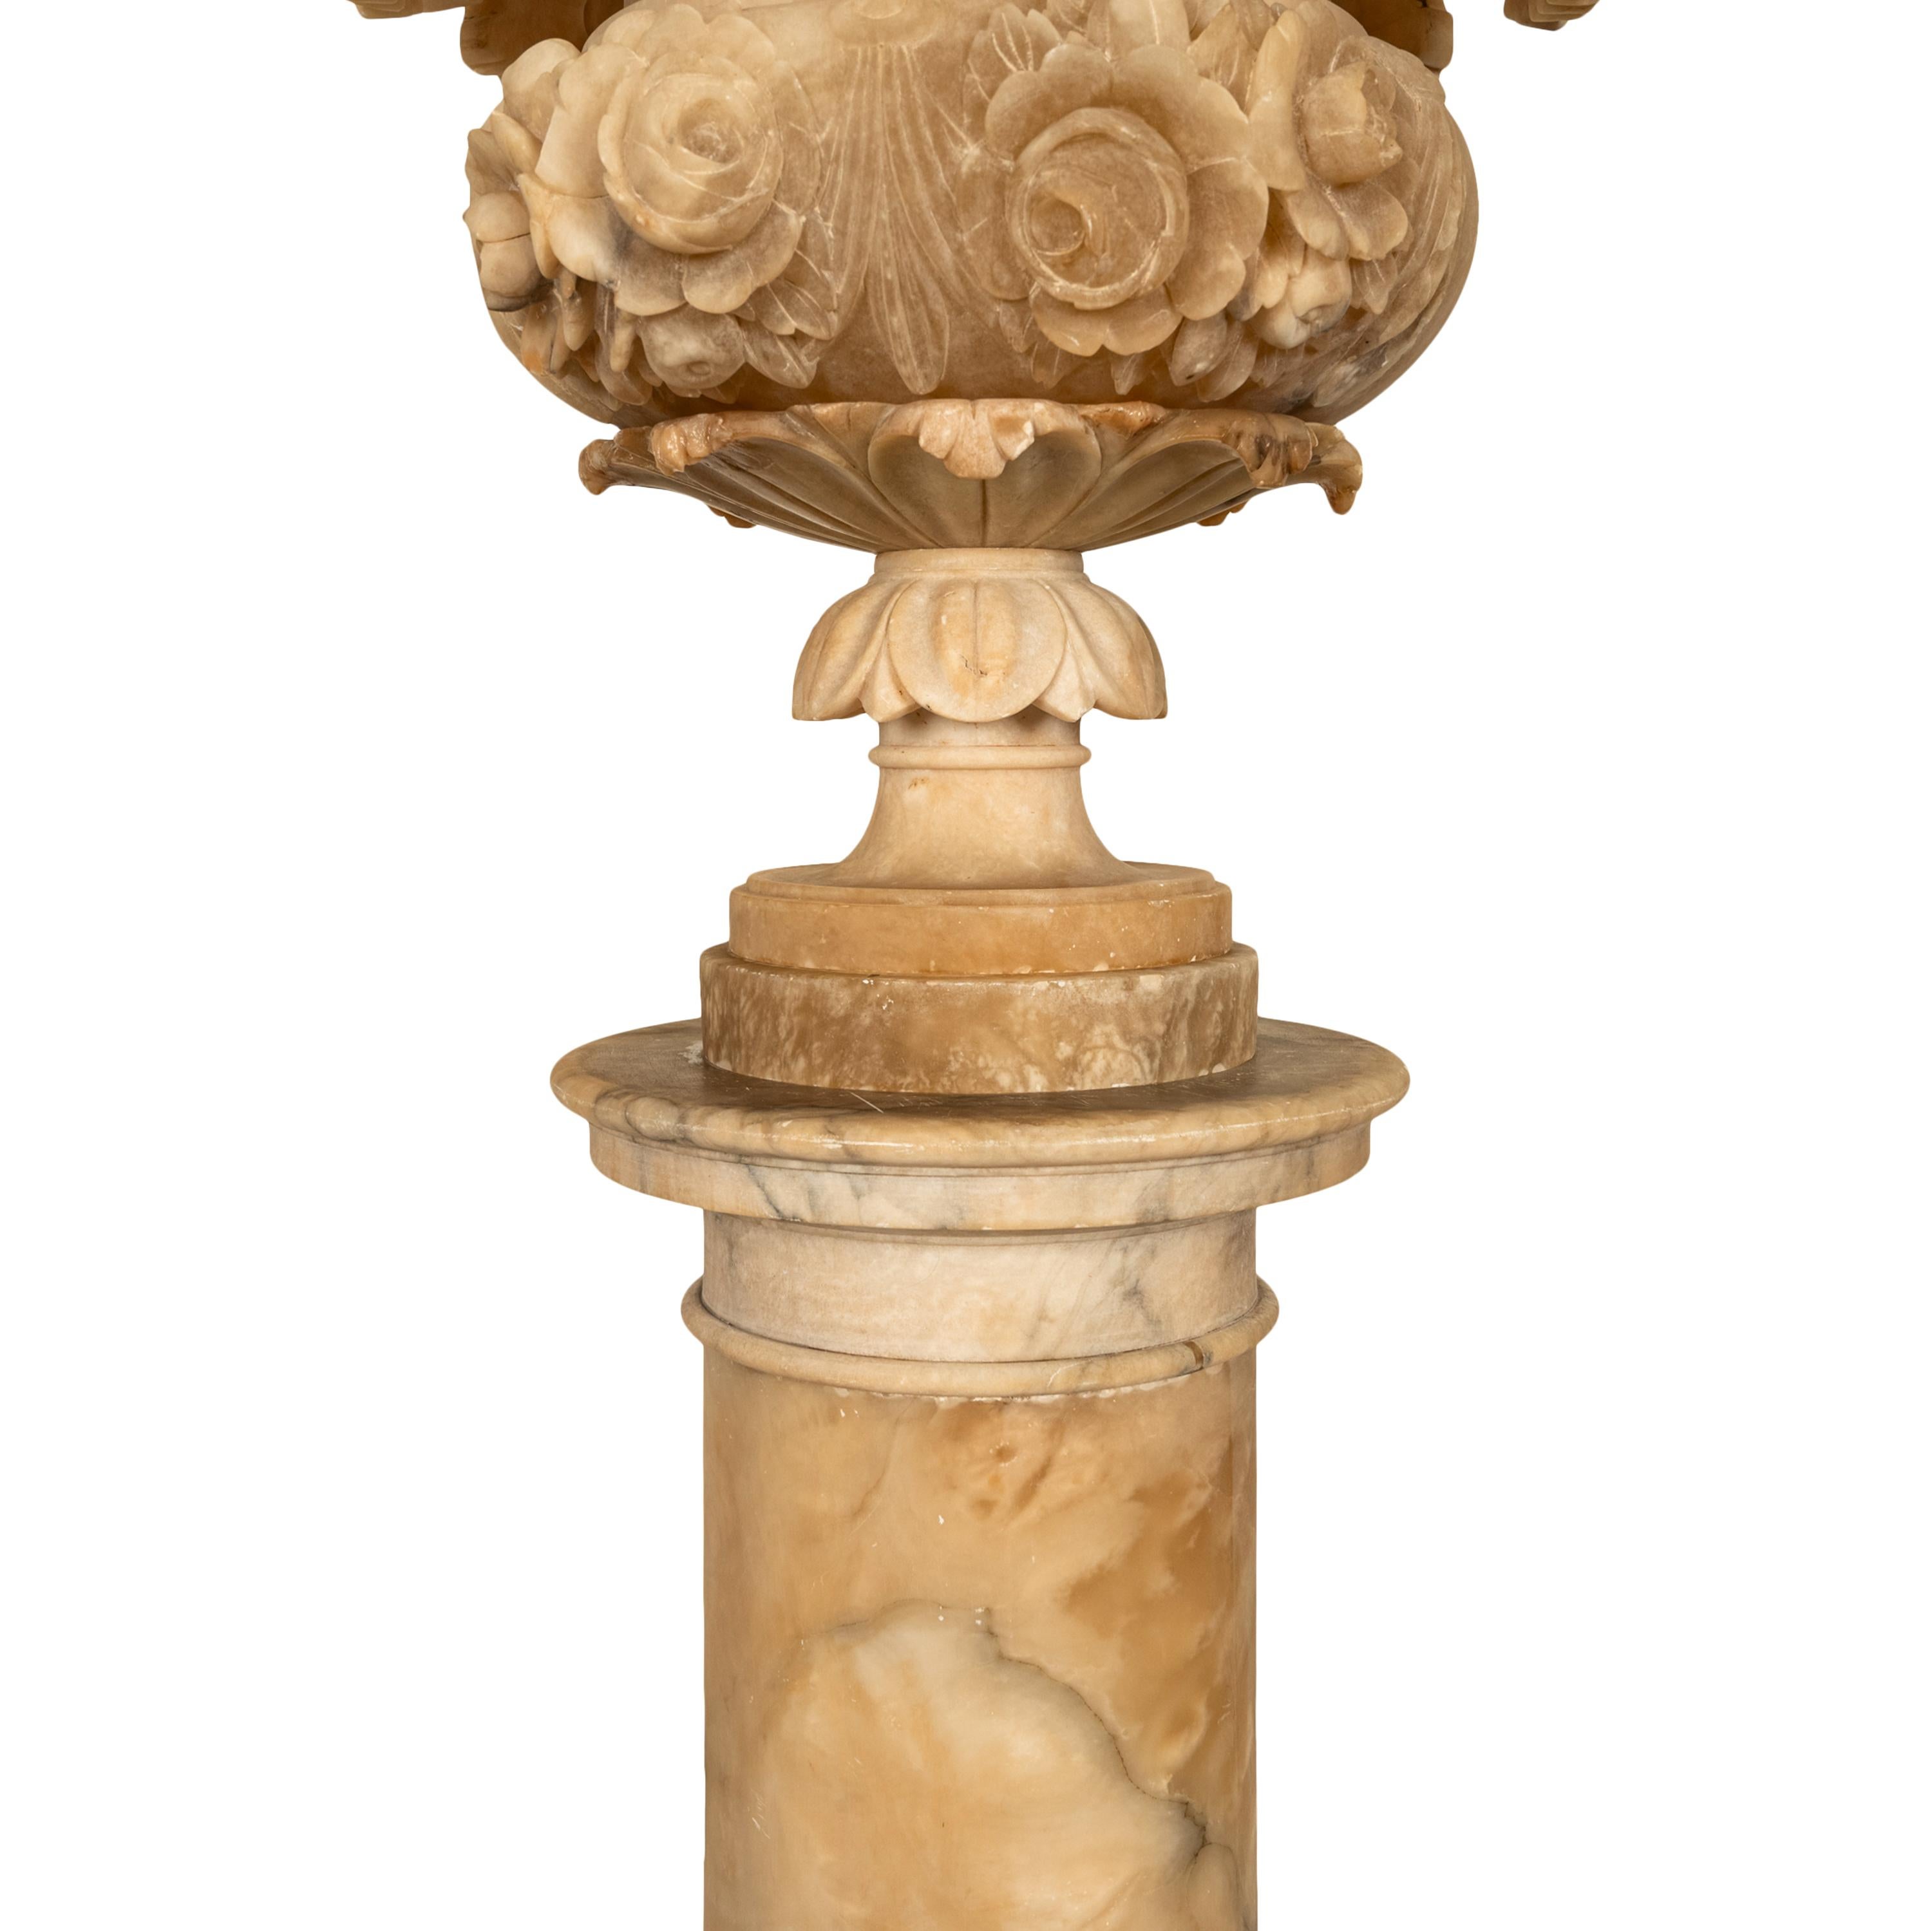 Antique 19th Century Italian Carved Alabaster Neoclassical Urn on Pedestal 1850 For Sale 14